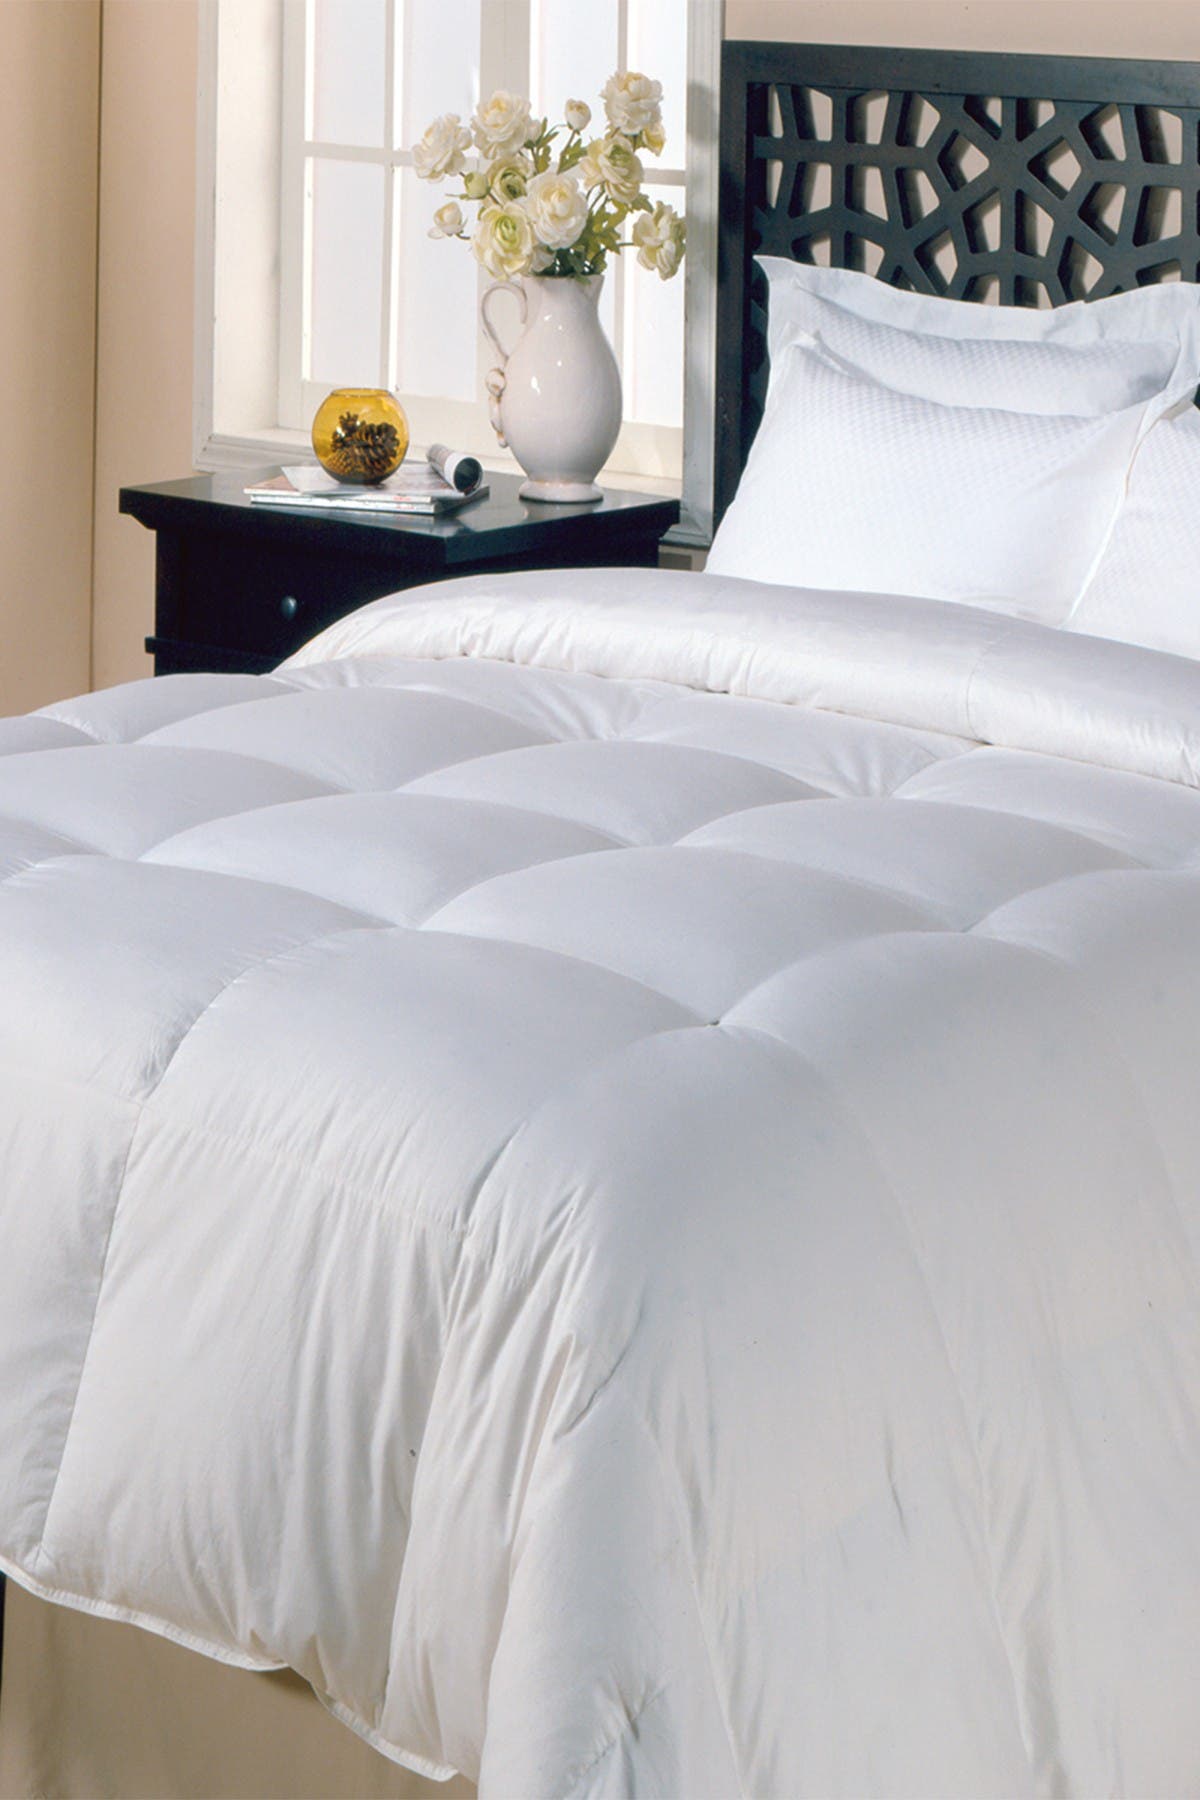 goose feather comforter king